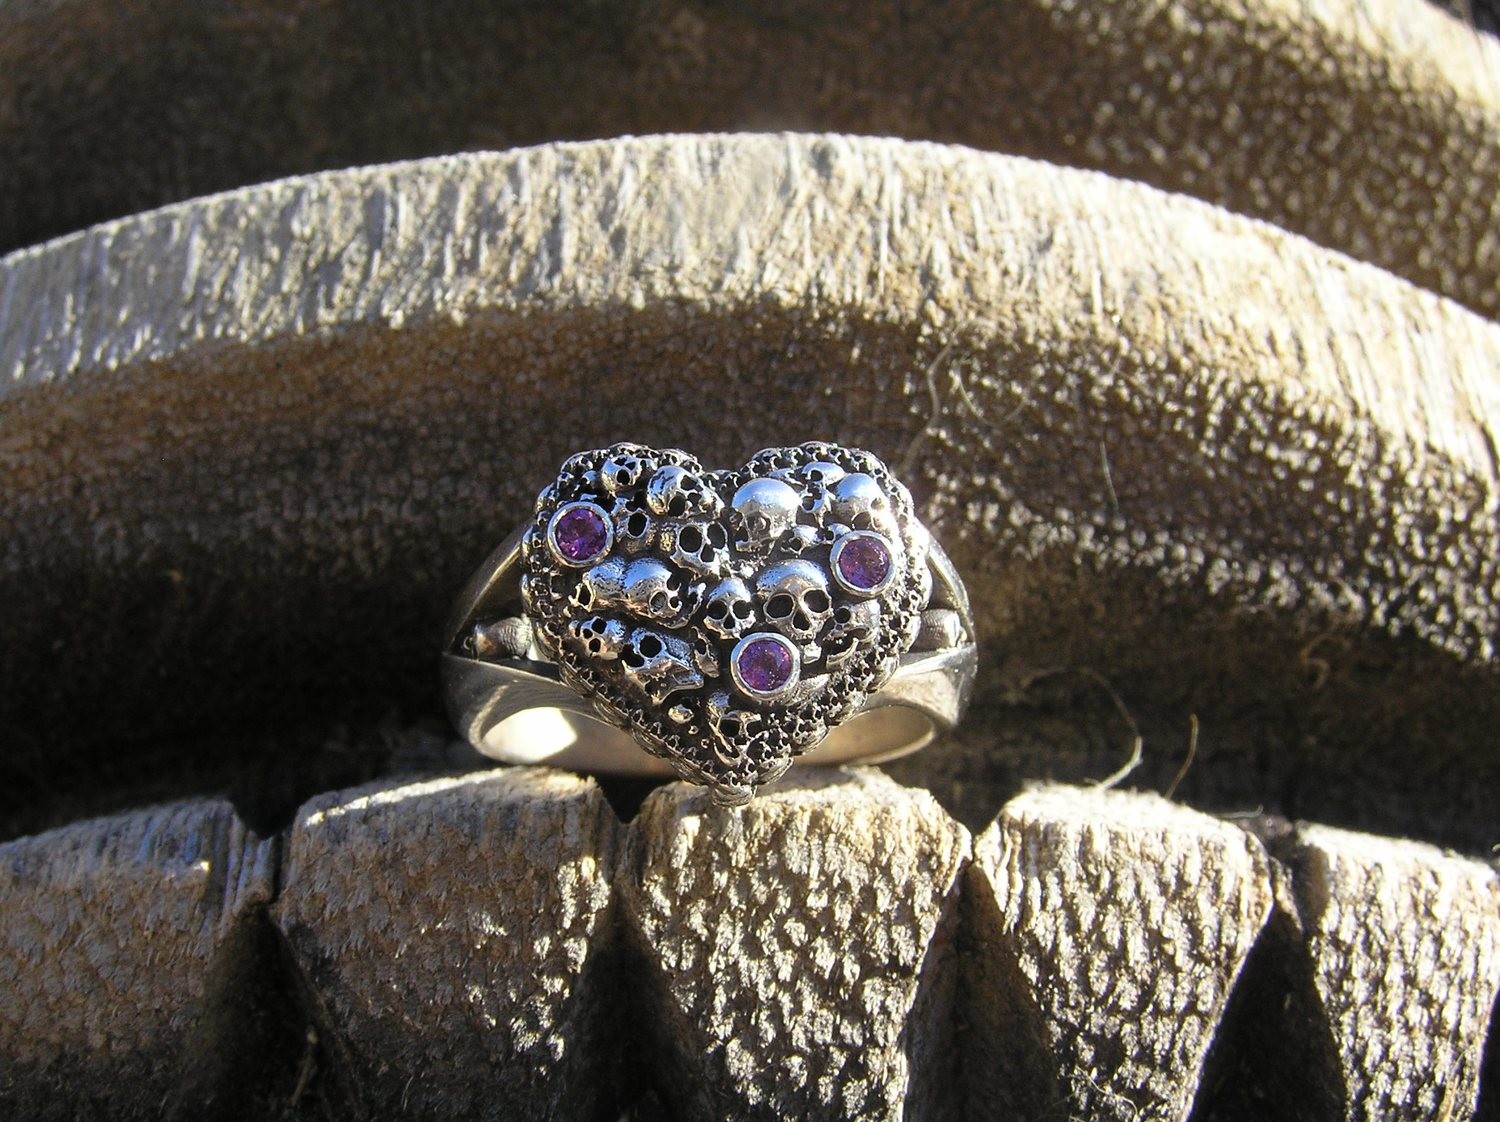 Spartan heart rings with Amethyst